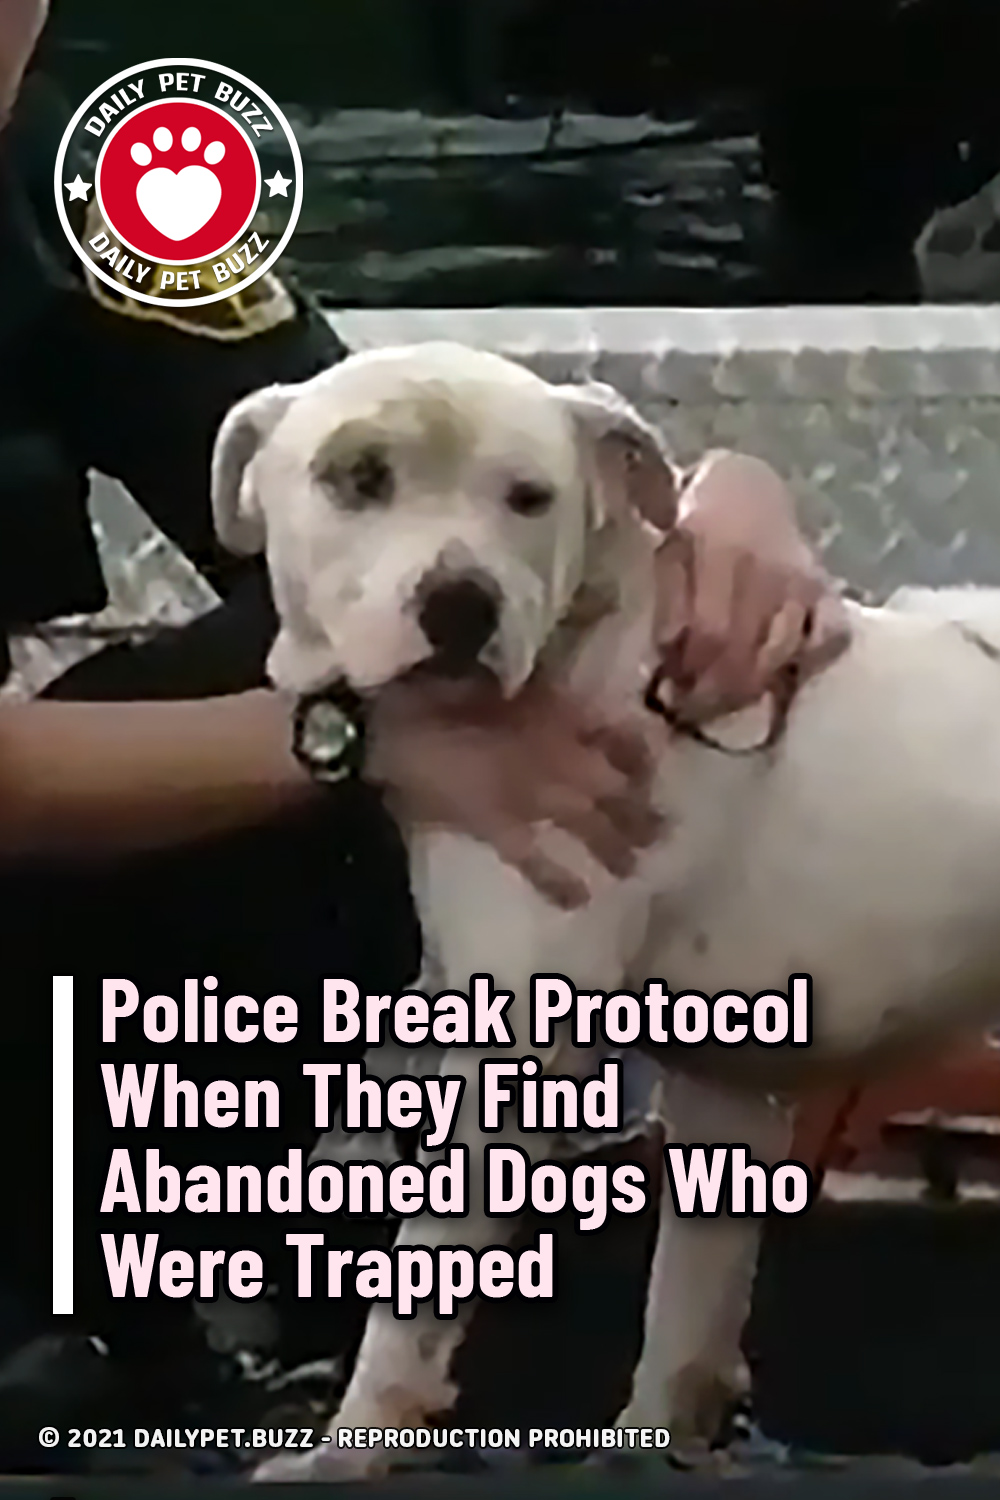 Police Break Protocol When They Find Abandoned Dogs Who Were Trapped